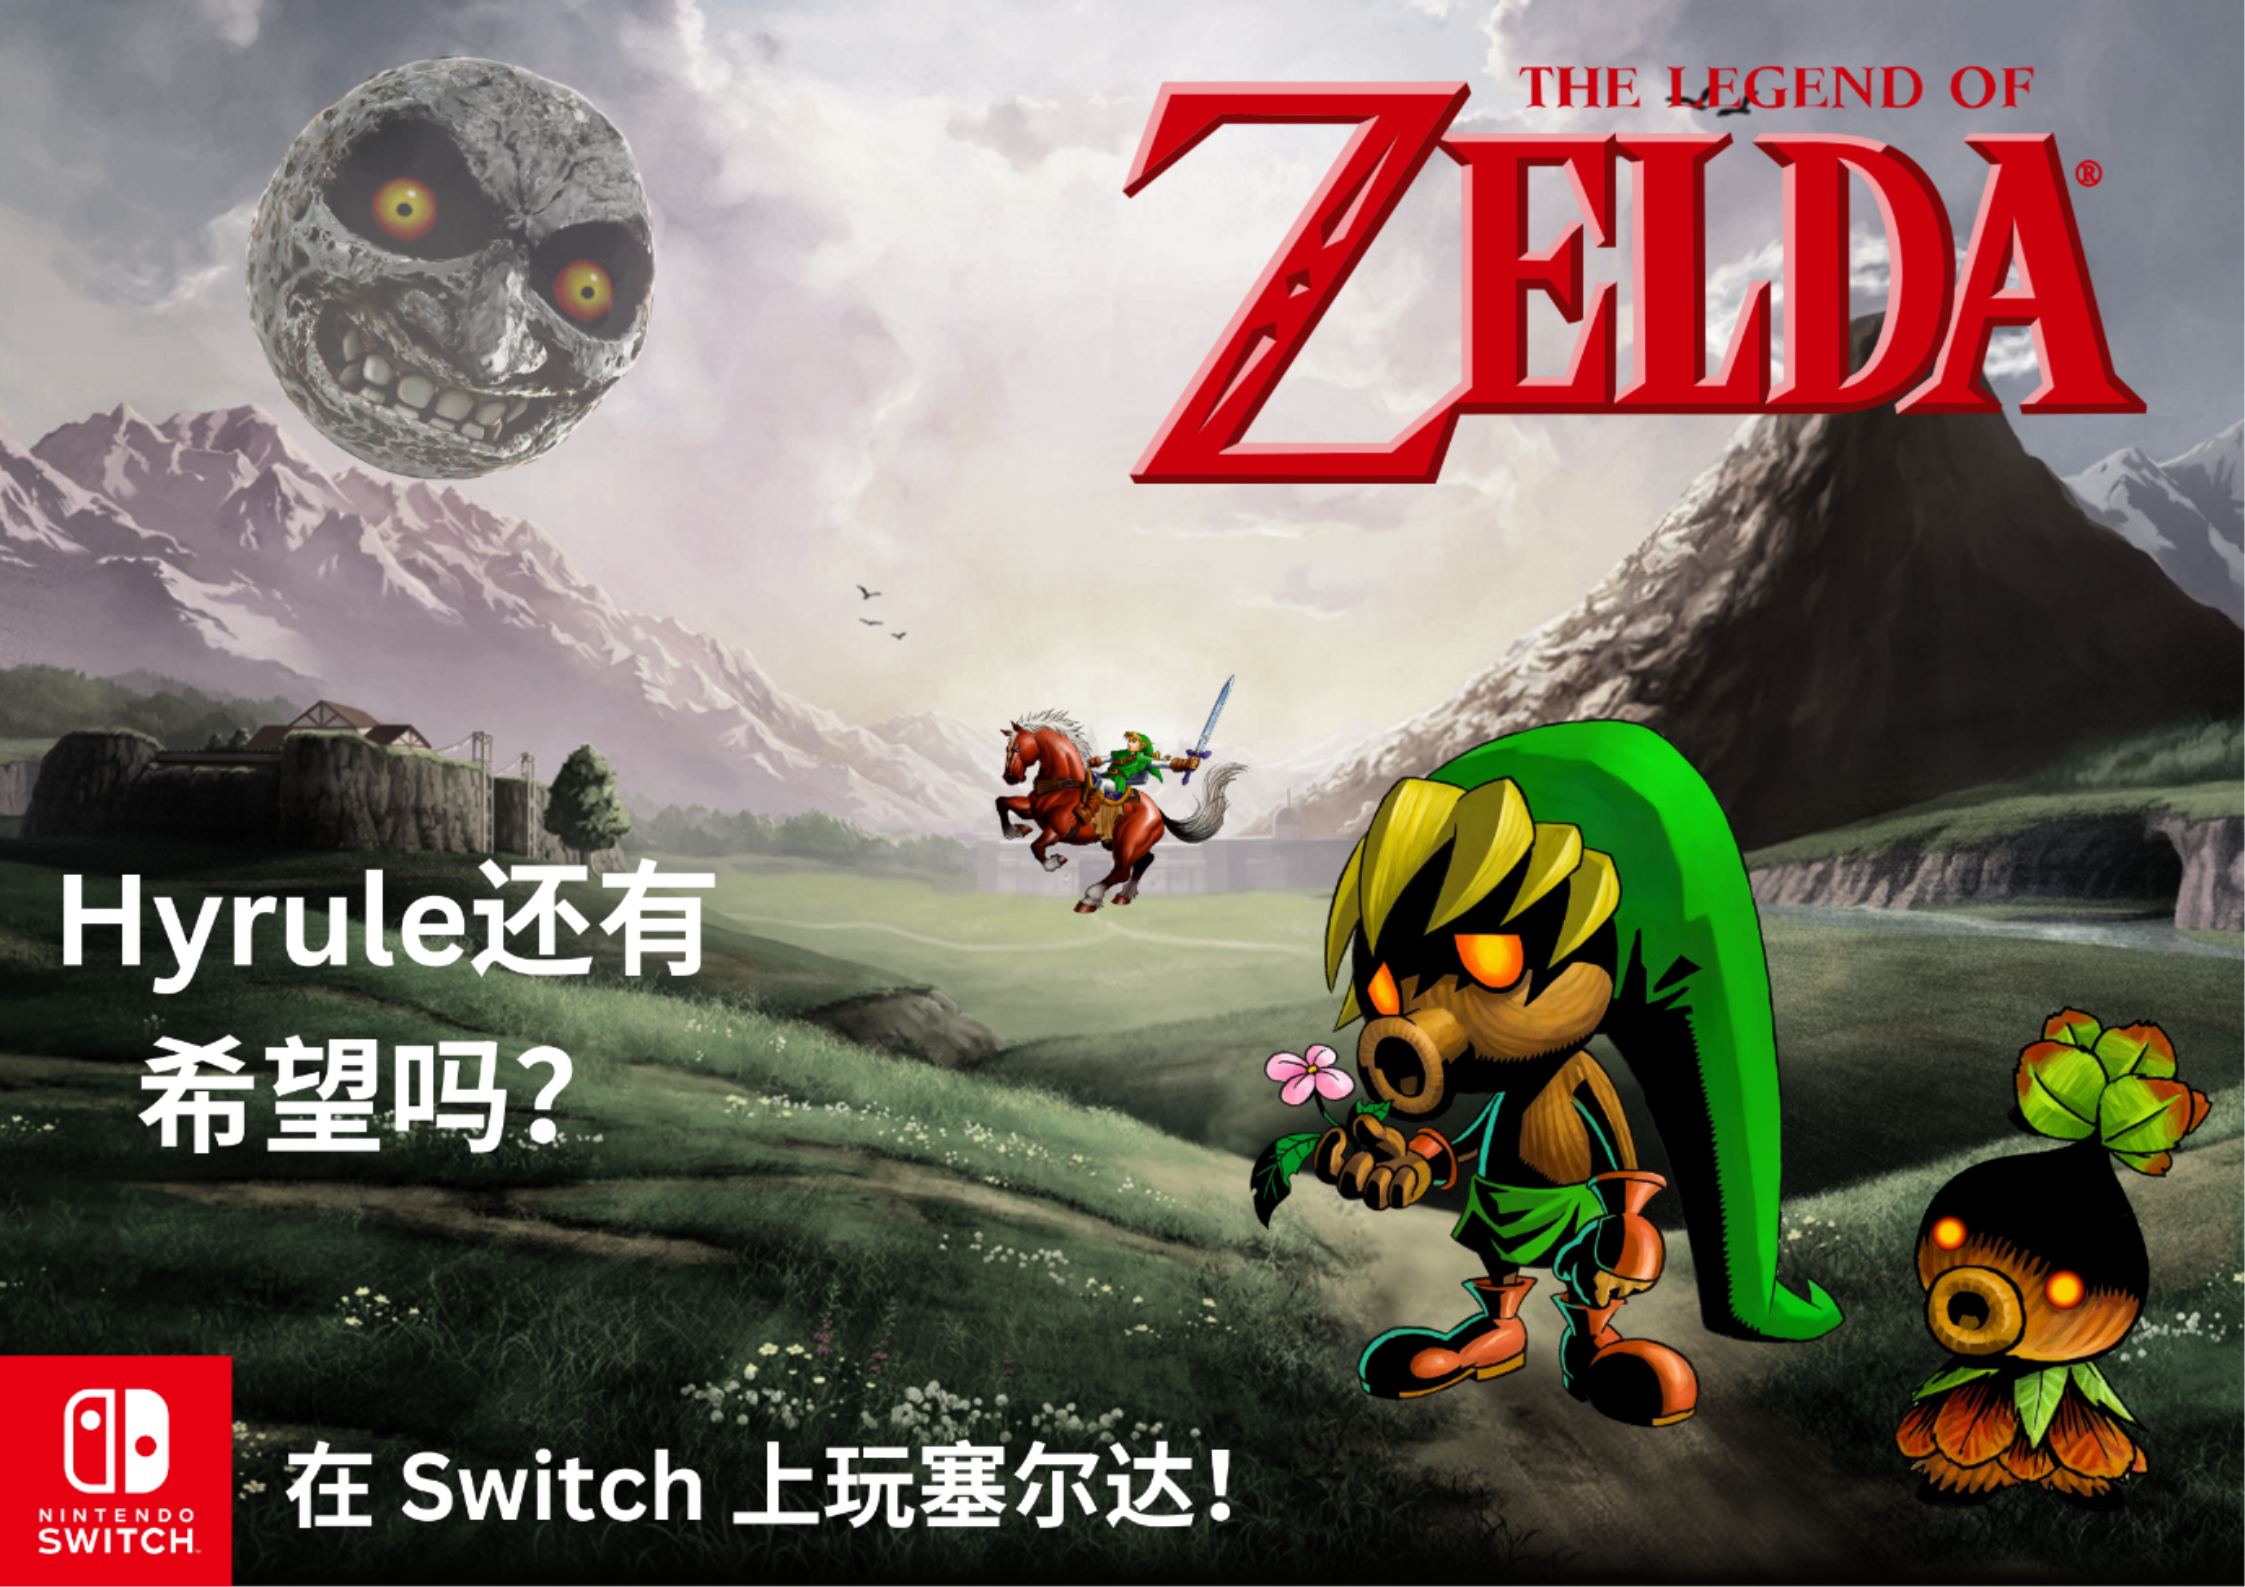 THE LEGEND OF ZELDA Chinese Poster Concept Art